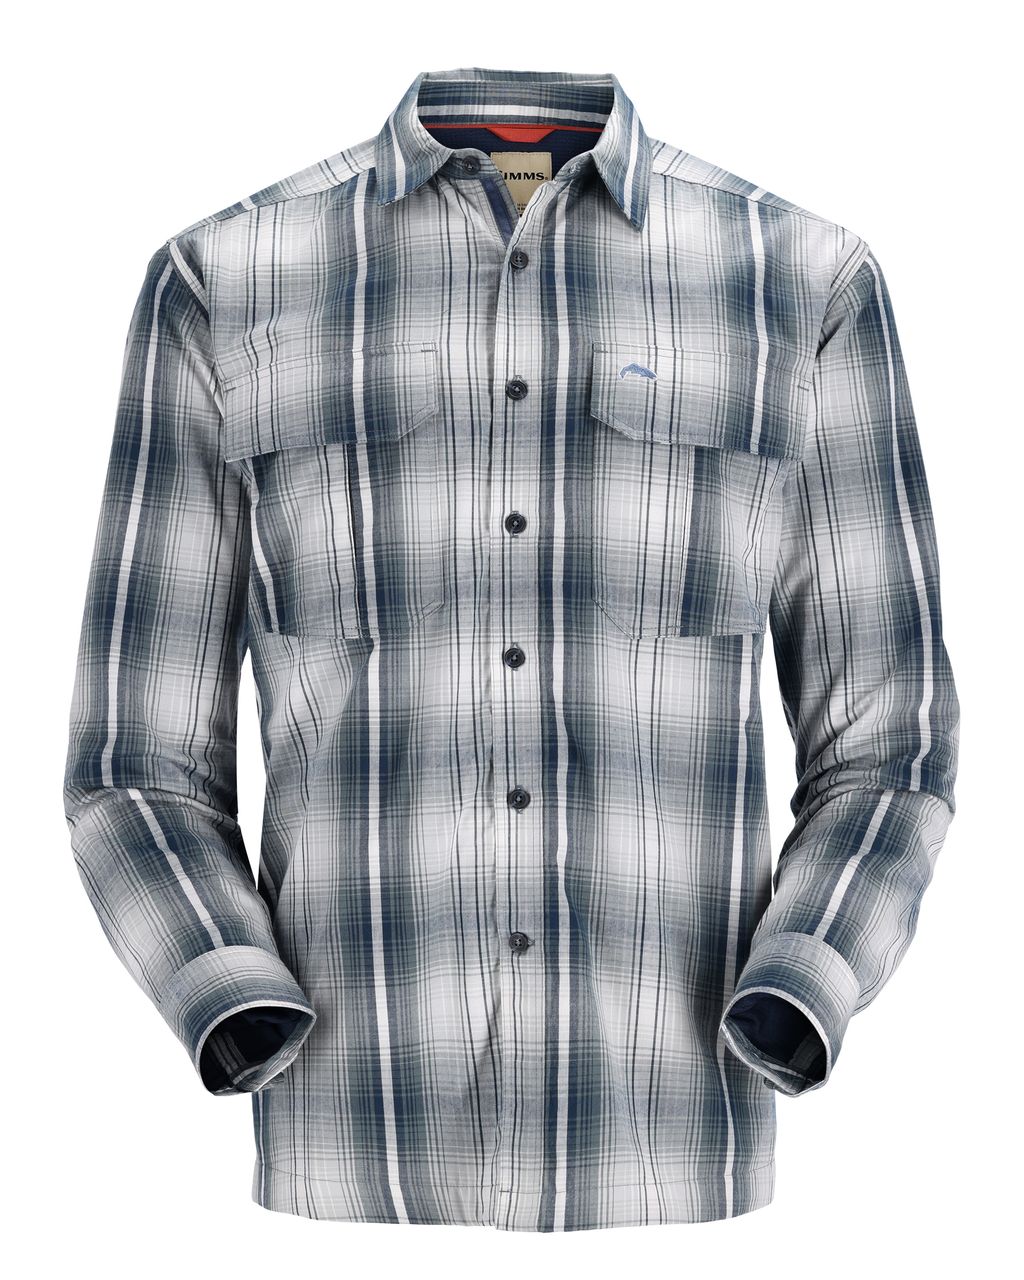 Simms Coldweather Shirt - Navy Sterling Plaid